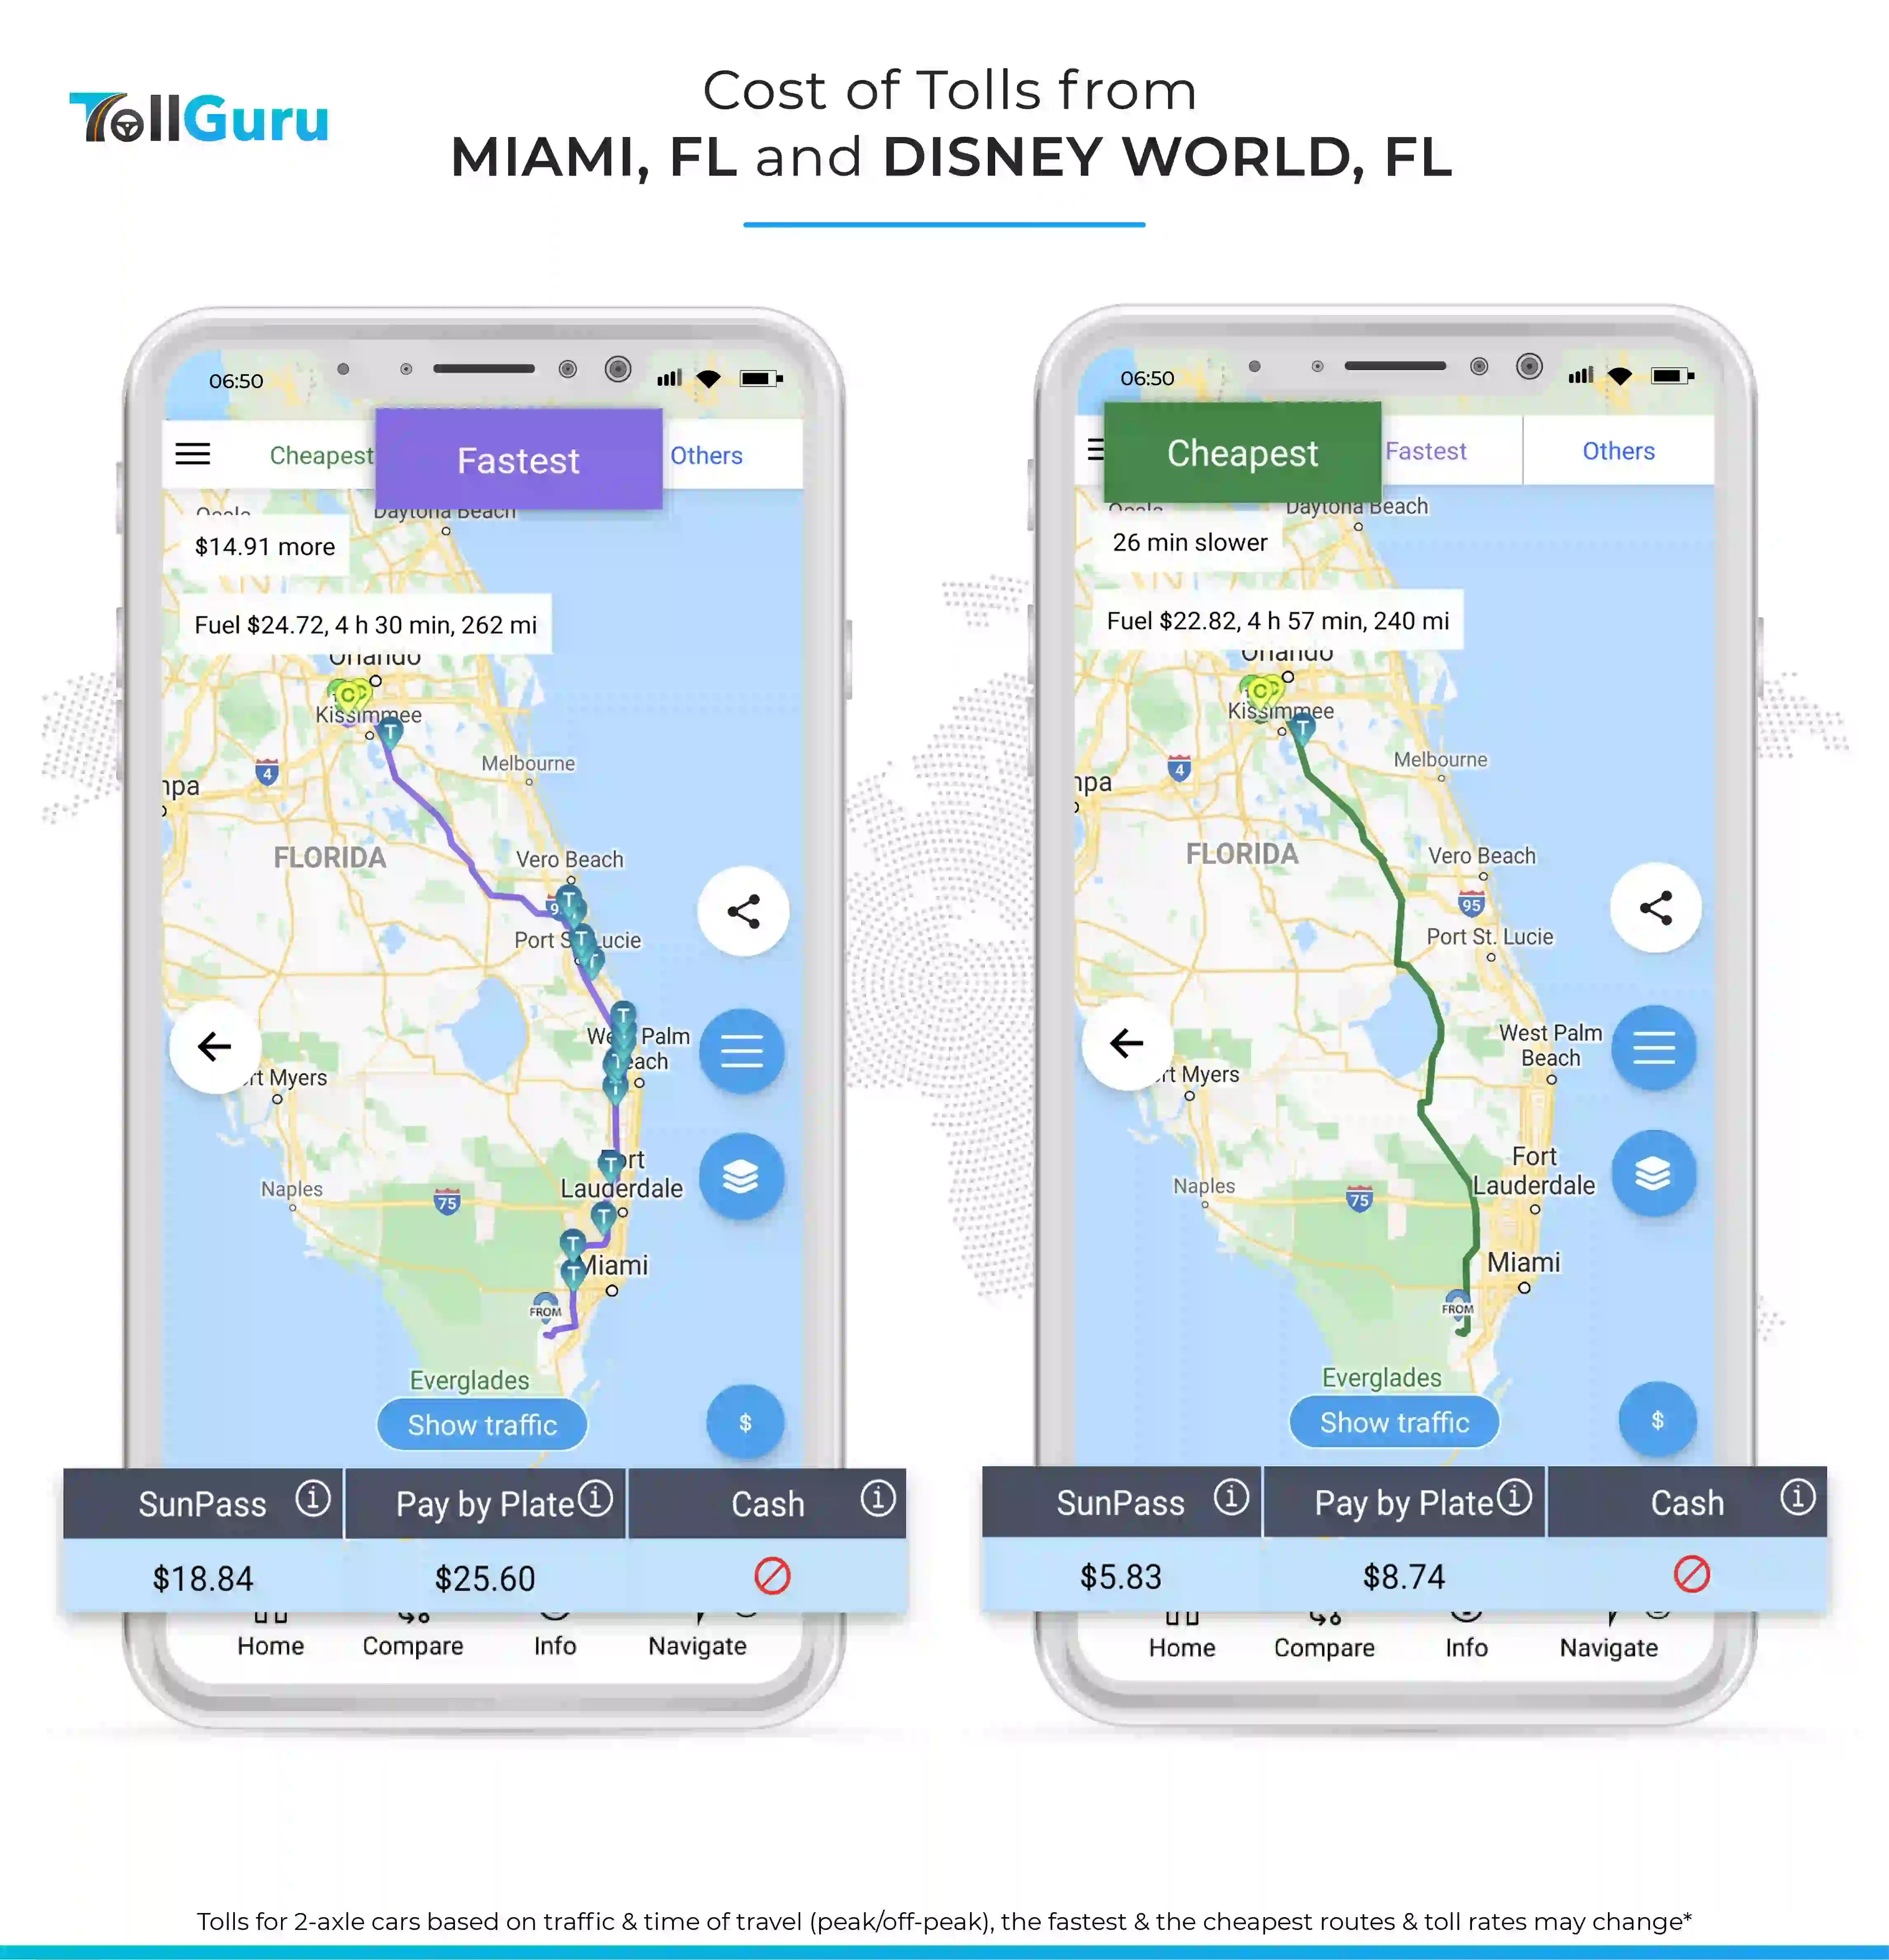 Tolls and fuel cost to travel by car from Miami to Disney World, FL along typical fast route and cheap route.